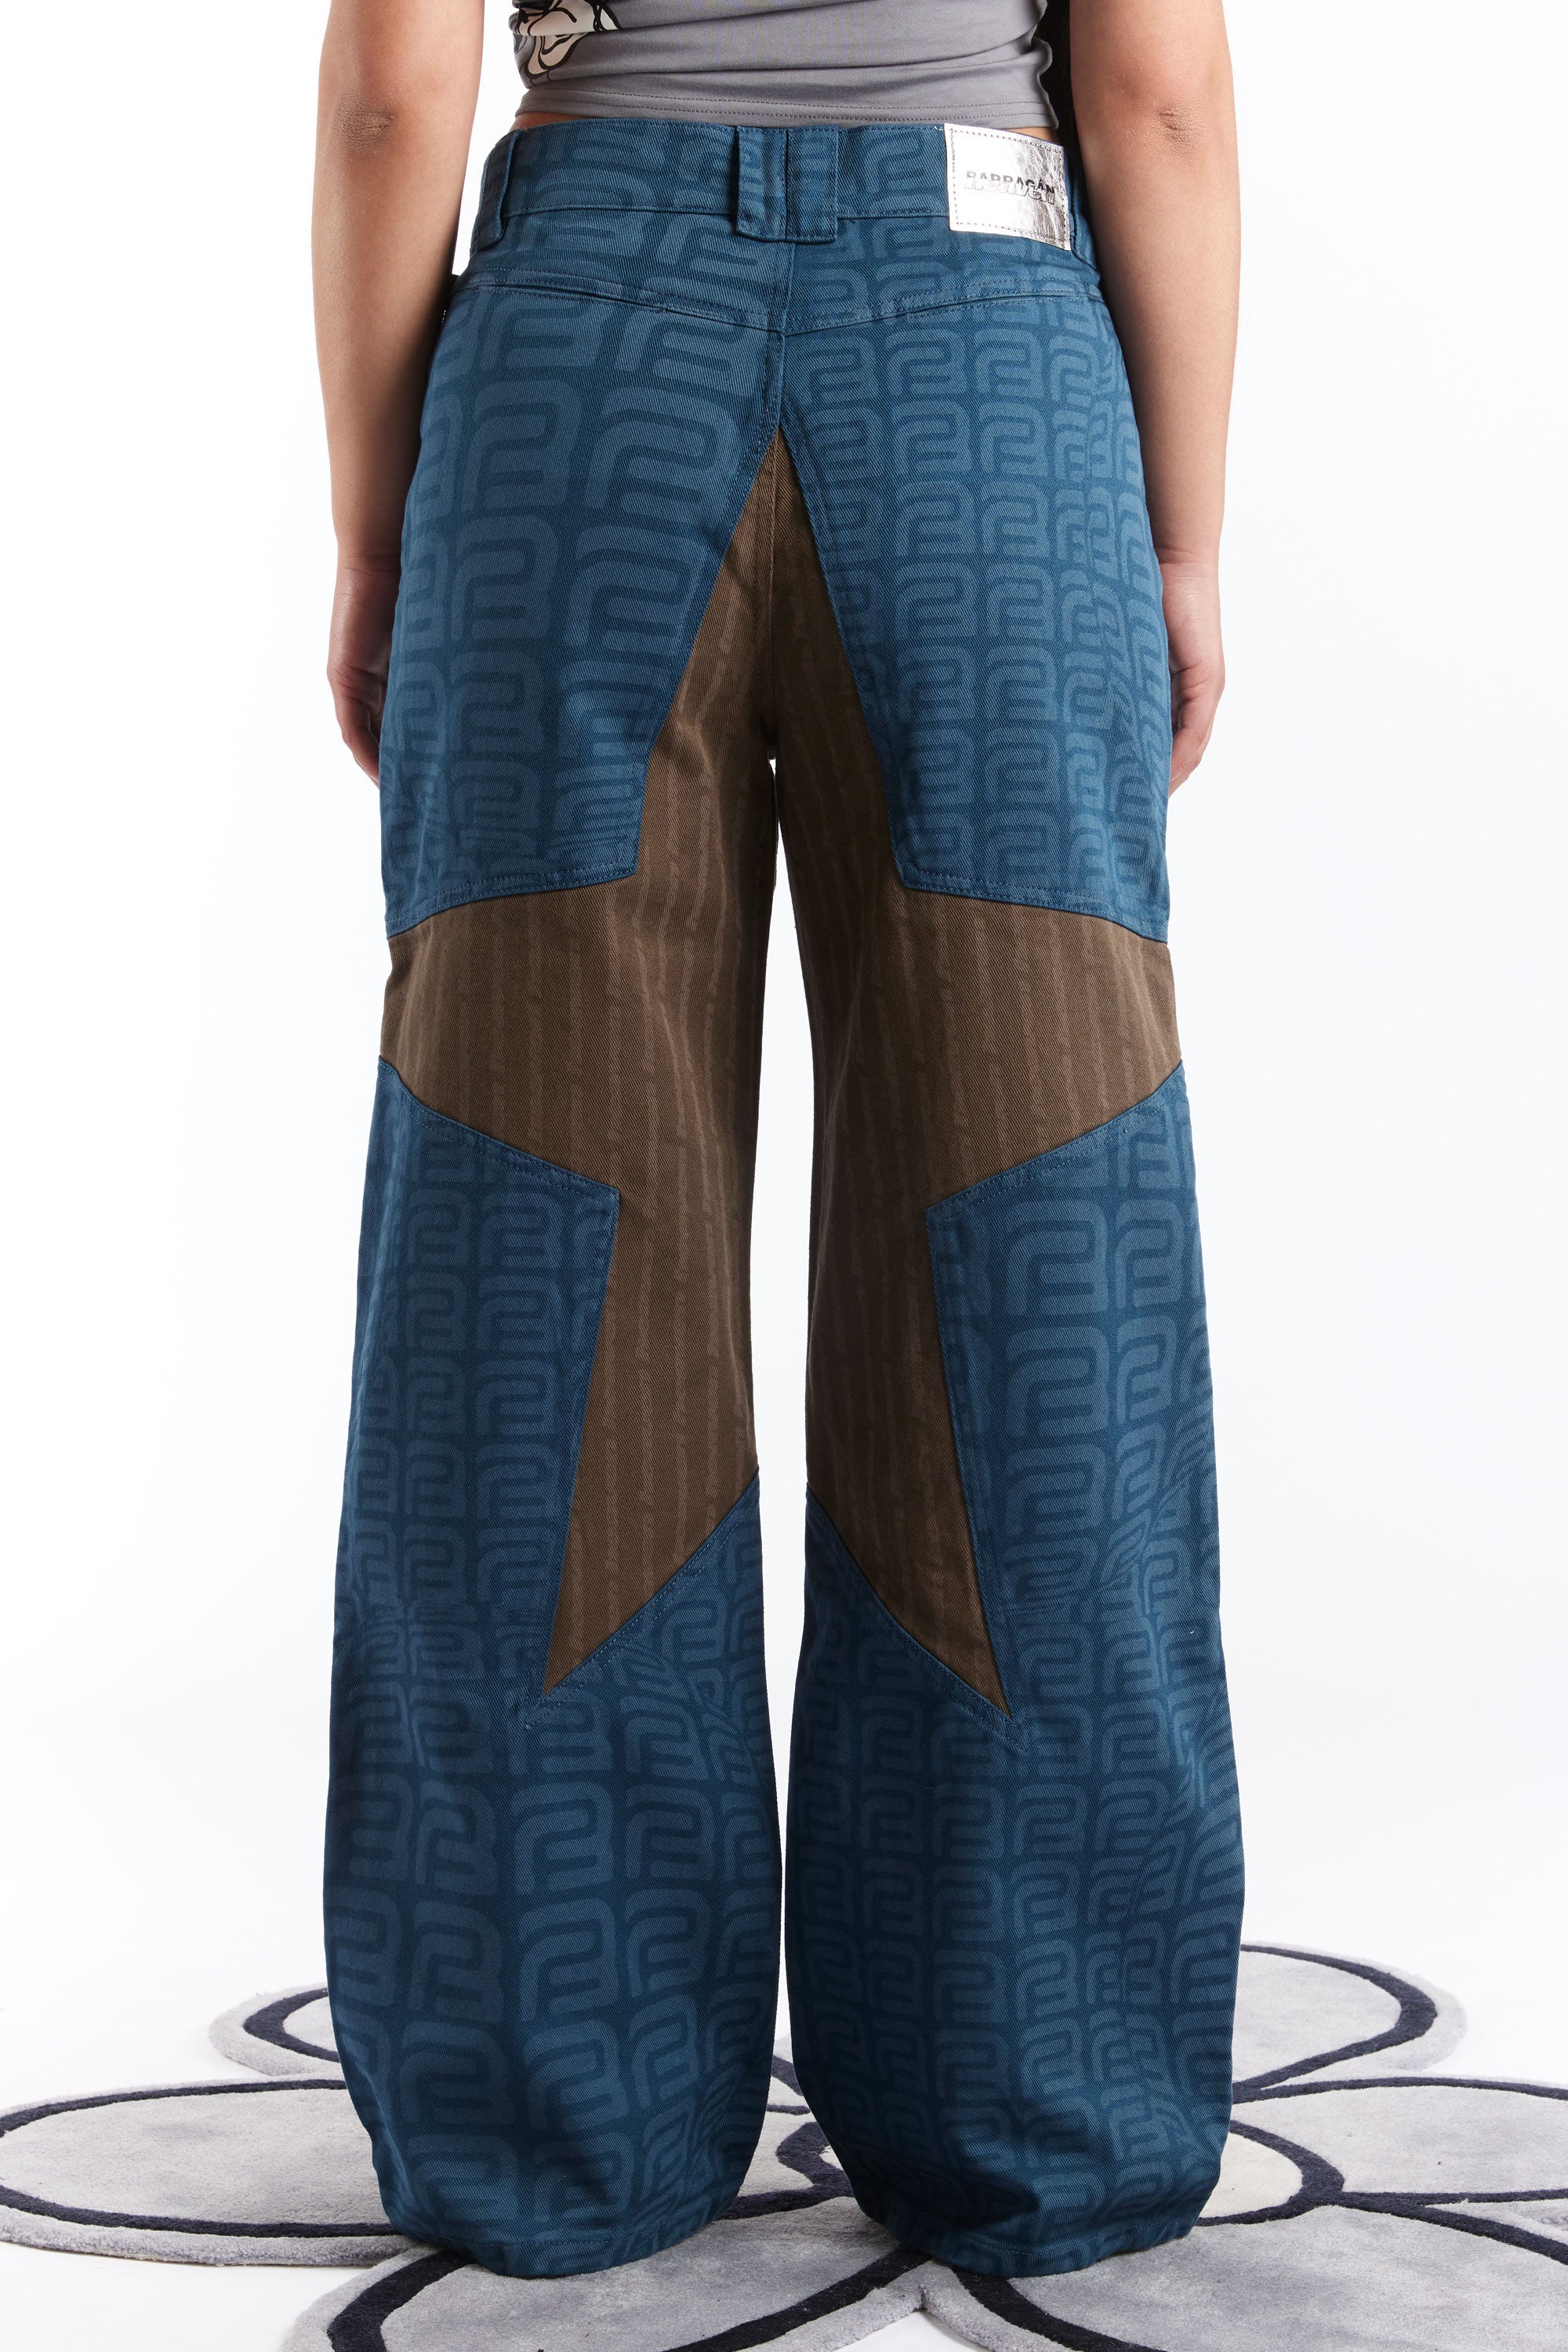 The HEAVEN - BARRAGAN STAR PANT  available online with global shipping, and in PAM Stores Melbourne and Sydney.